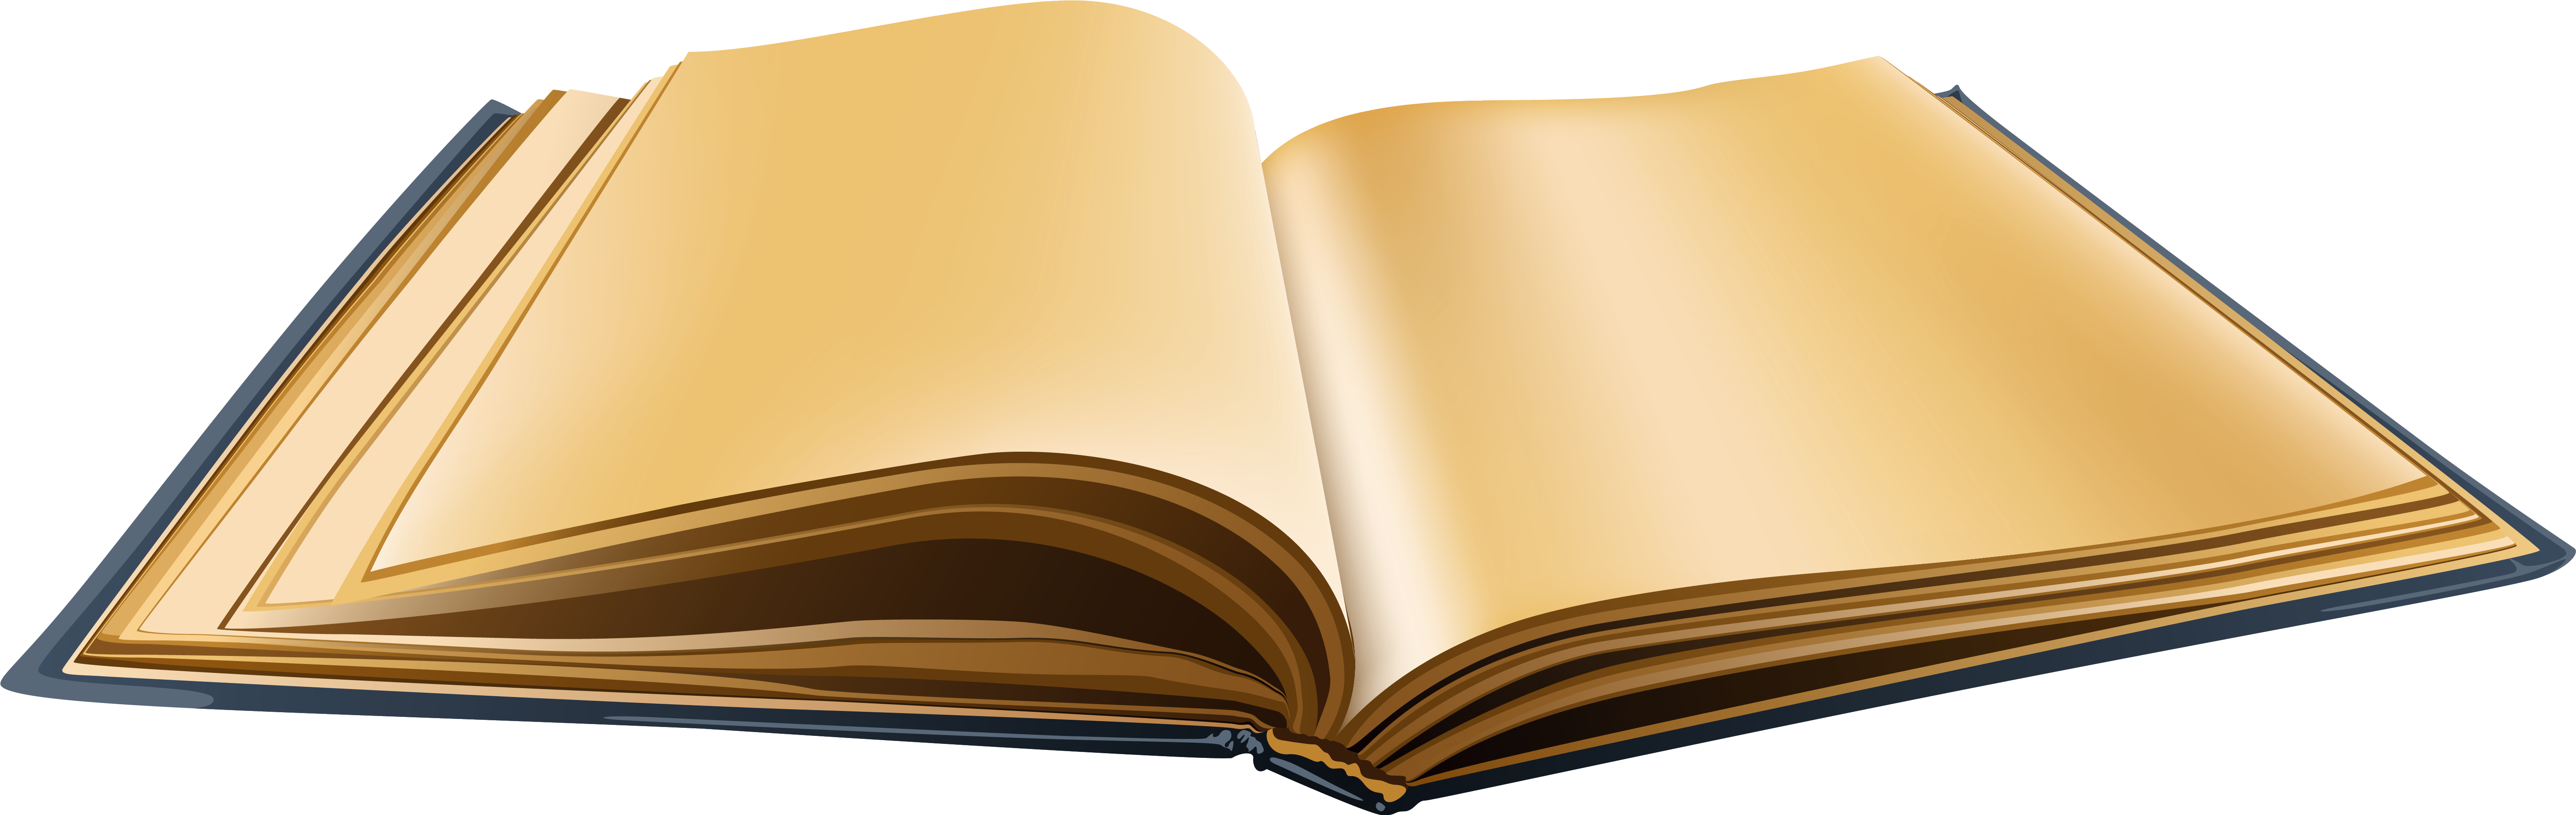 Lds Golden Plates Clipart - Old Book Clipart Png (6265x1982)